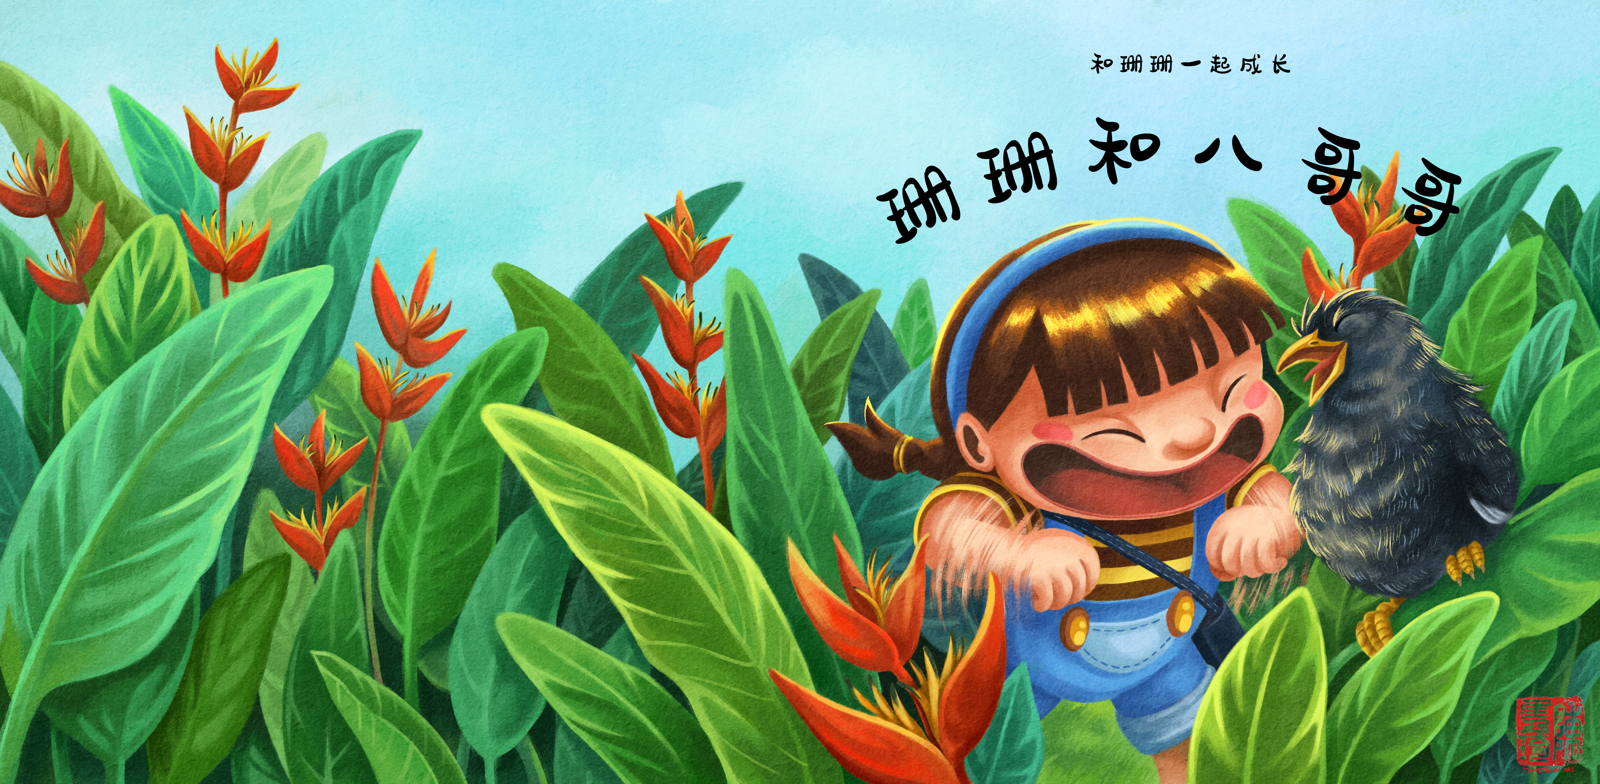 Book cover design (chinese version) of the third book in the series, Shan Shan and Big Brother Myna. It shows Shan Shan happily flapping her arms and singing along with Big Brother Myna amongst a grove of heliconia.